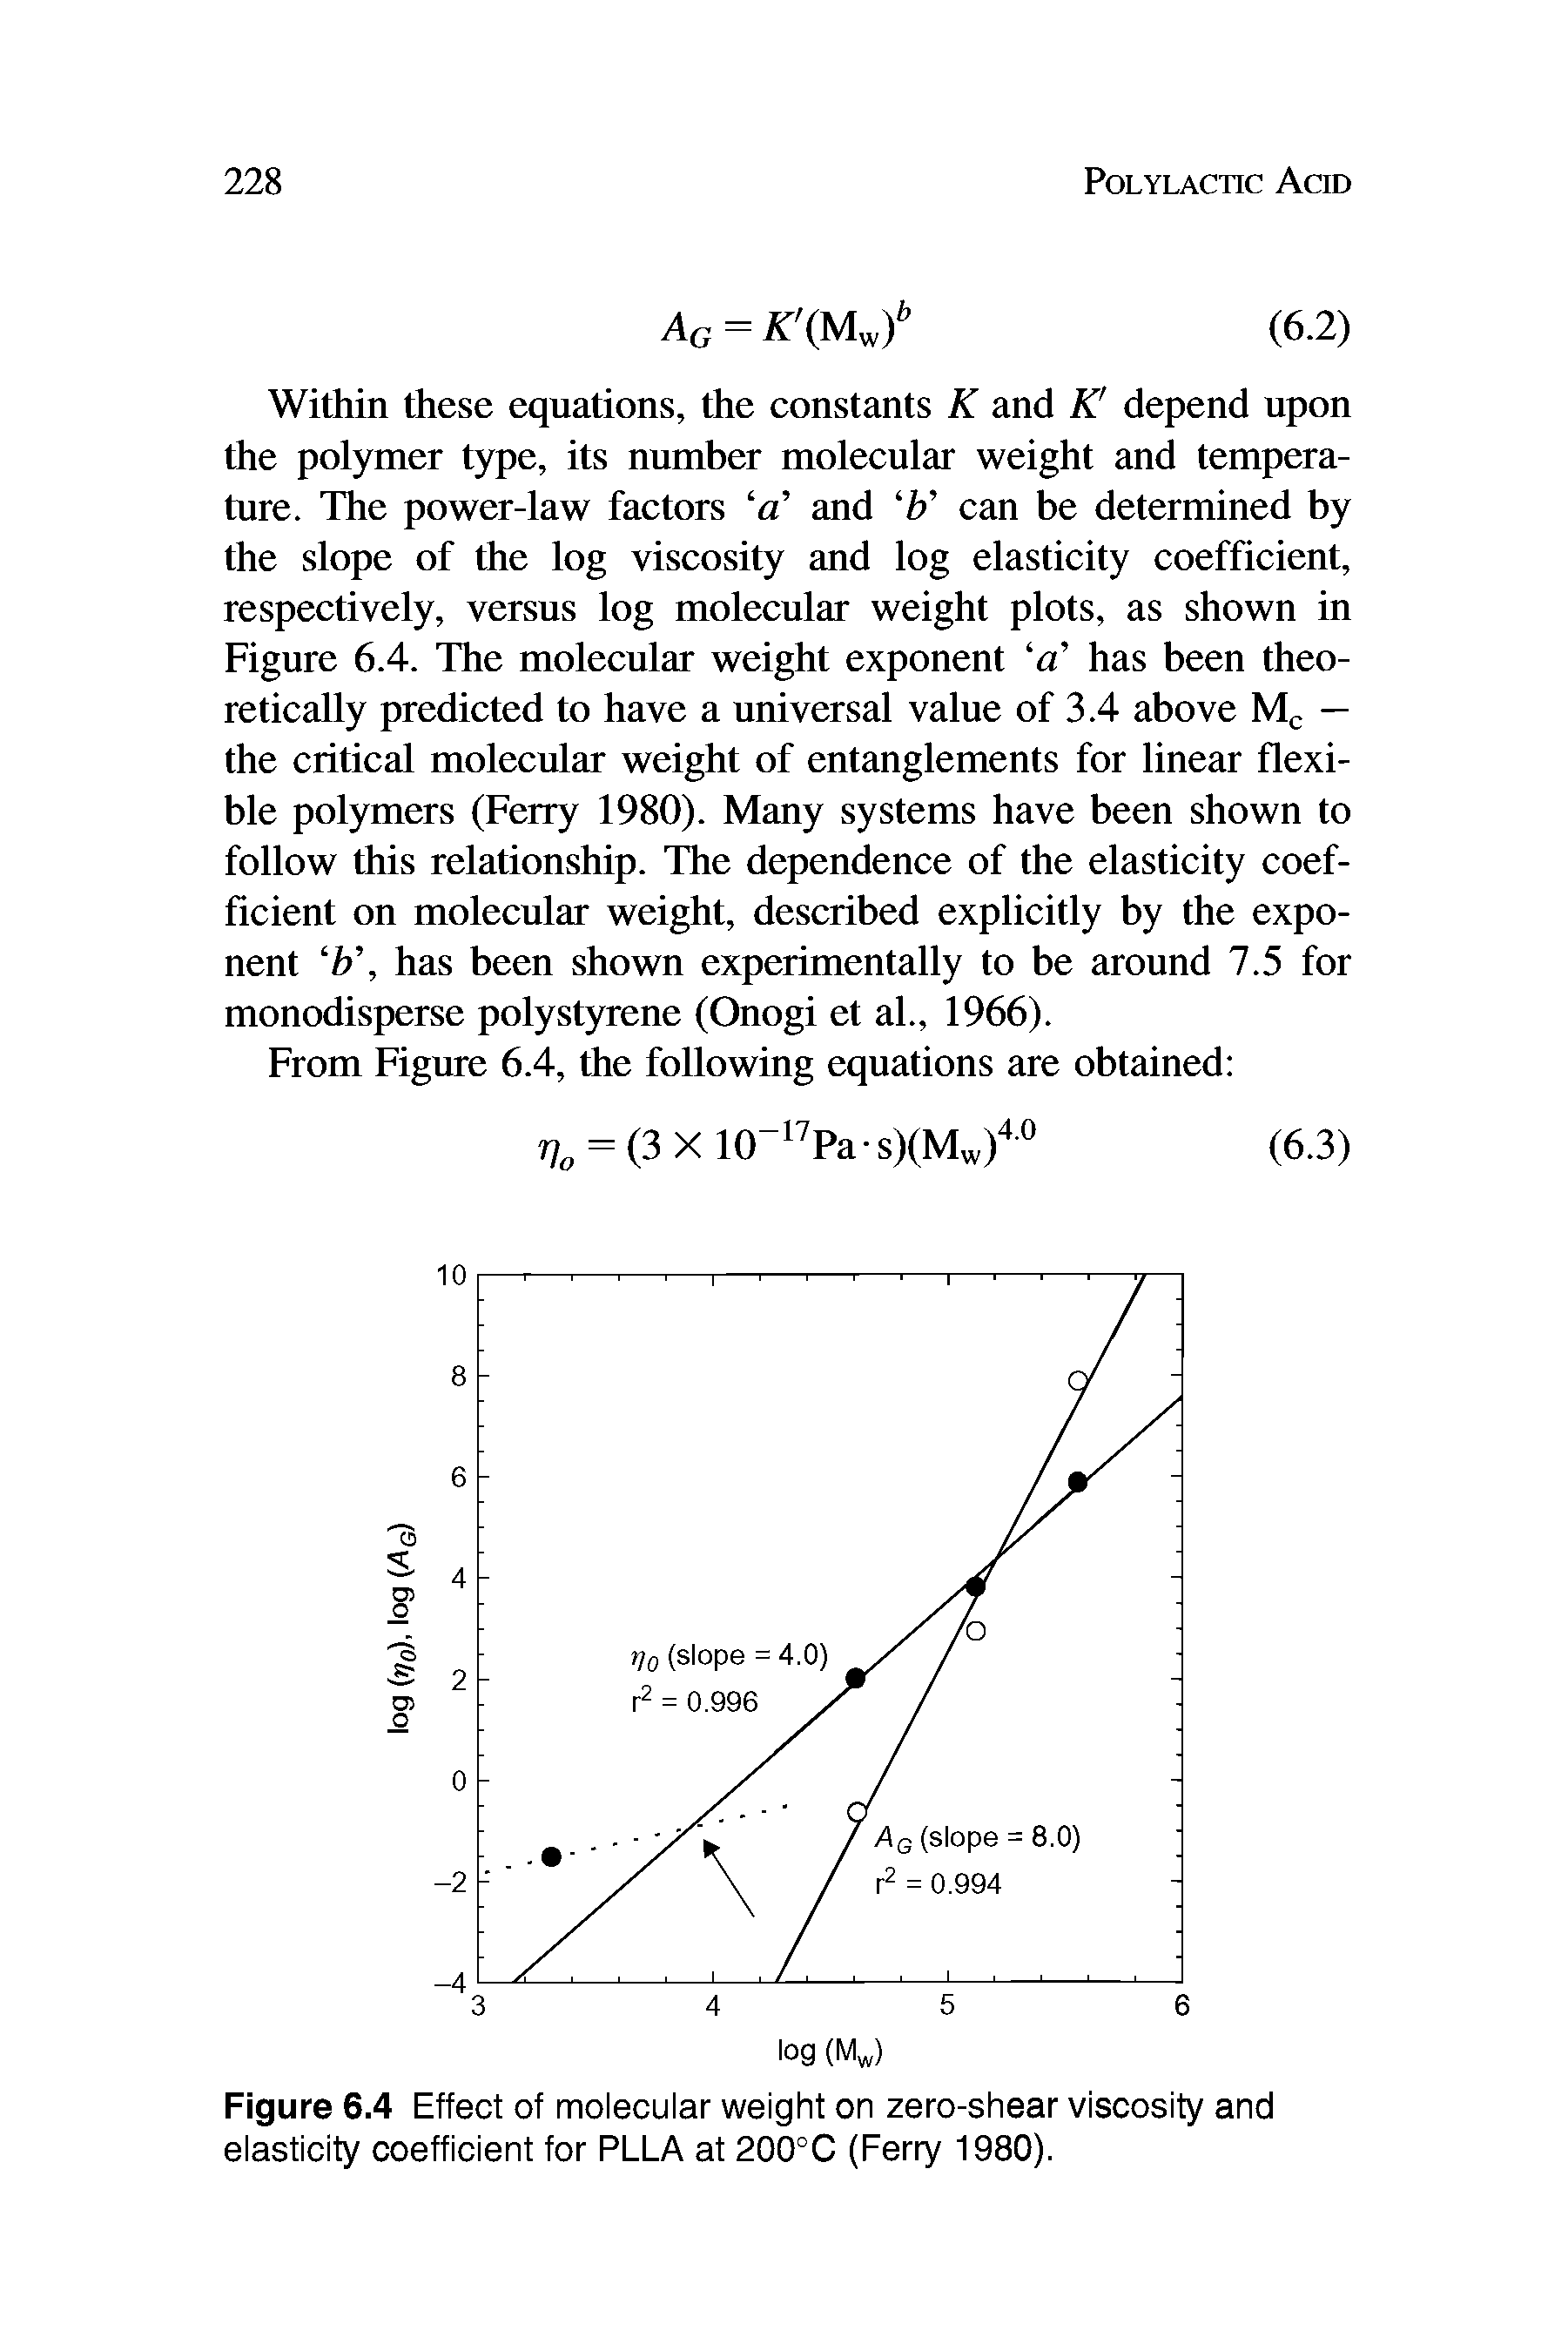 Figure 6.4 Effect of molecular weight on zero-shear viscosity and elasticity coefficient for PLLA at 200°C (Ferry 1980).